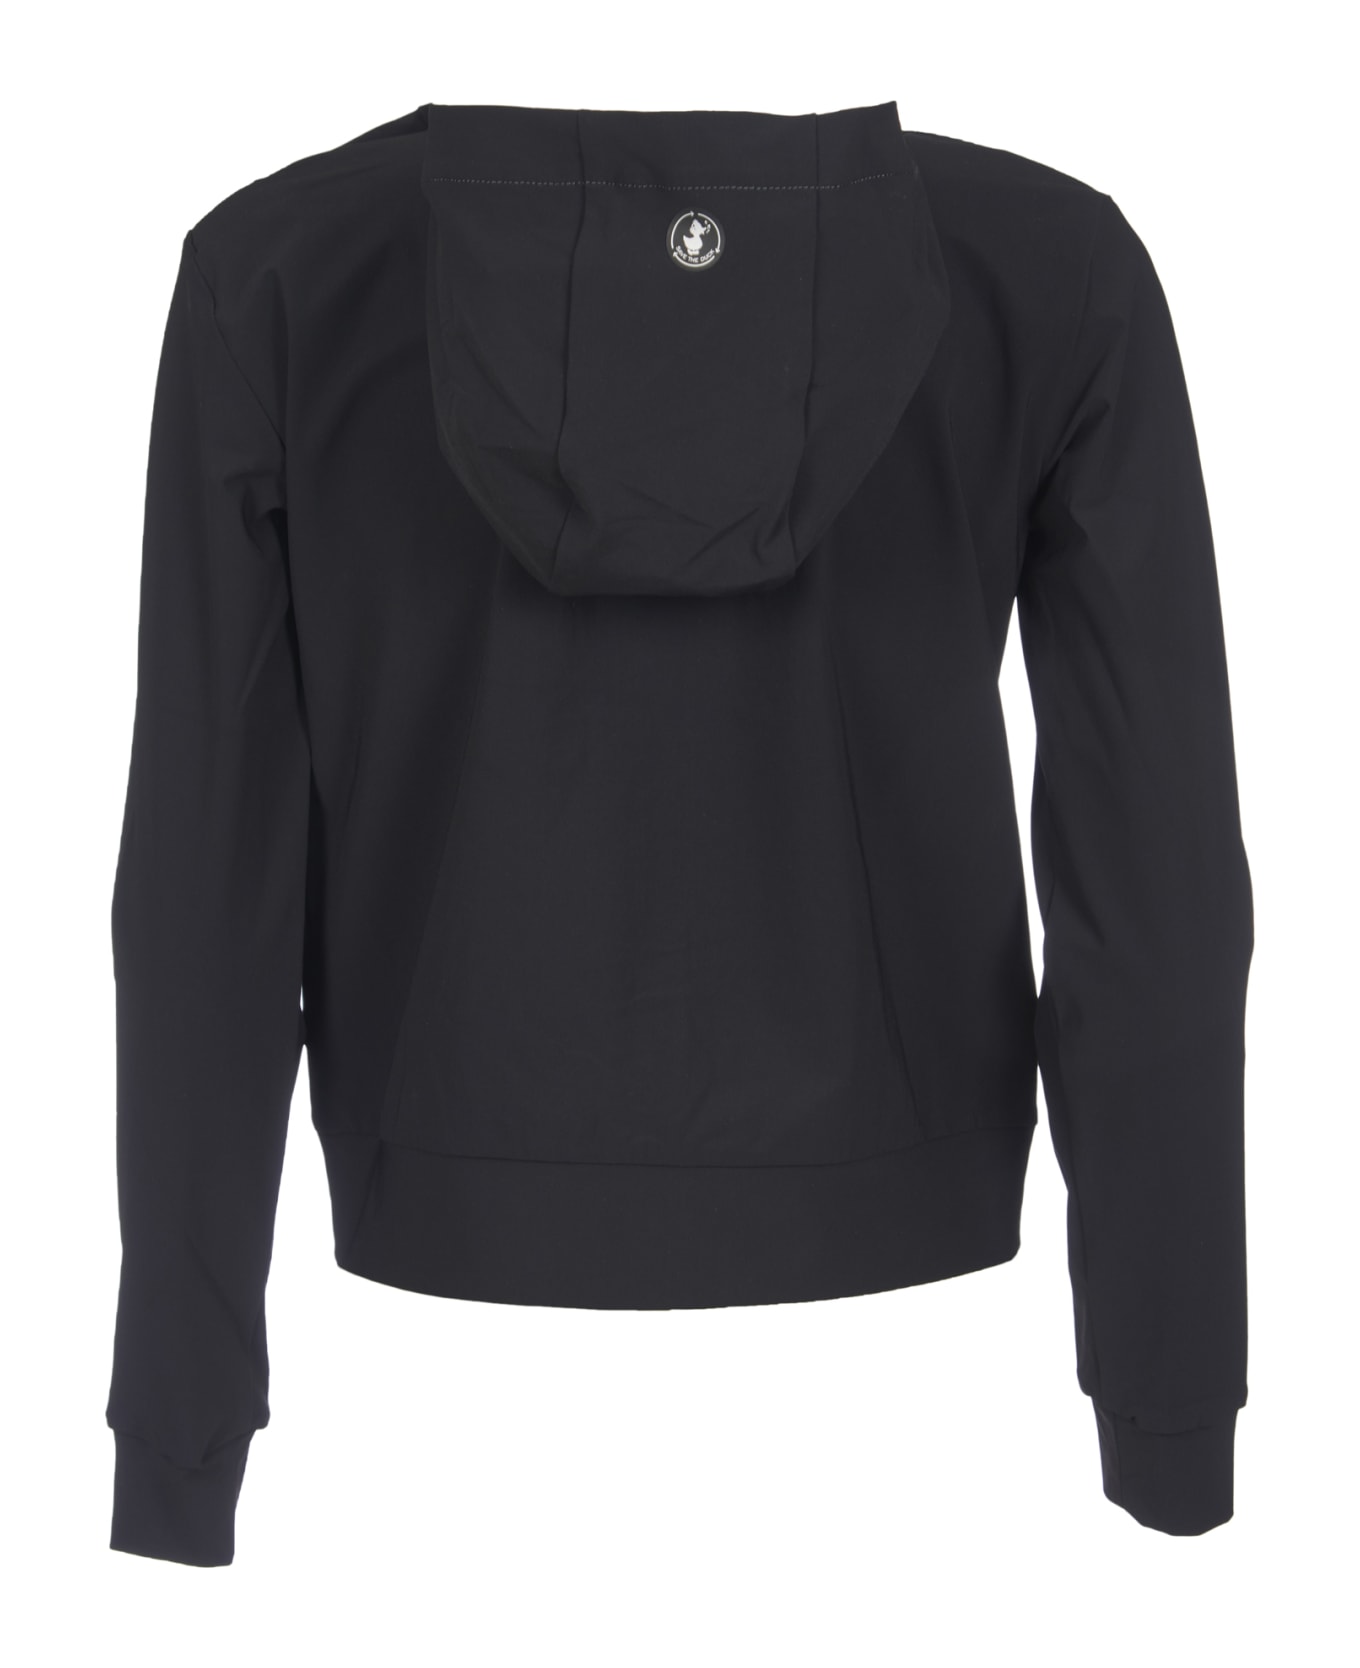 Save the Duck Pear Jacket - Black